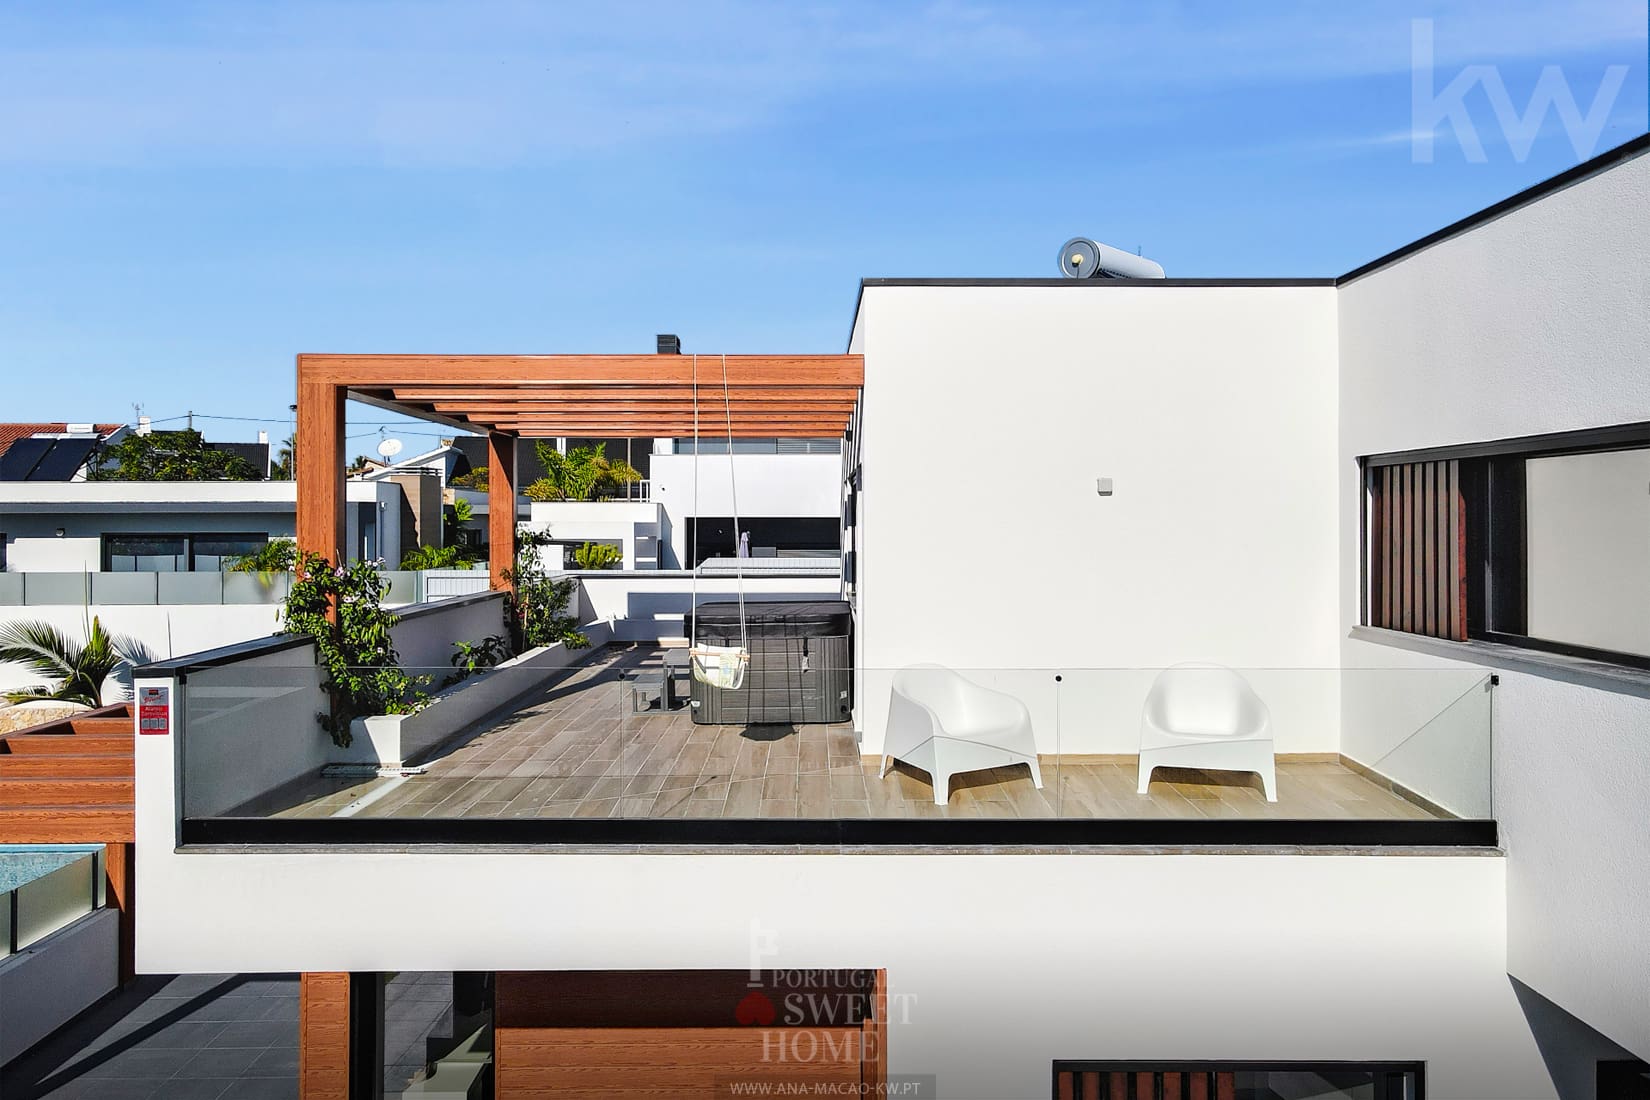 Large terrace on the 2nd floor (53.4 m2) with outdoor jacuzzi